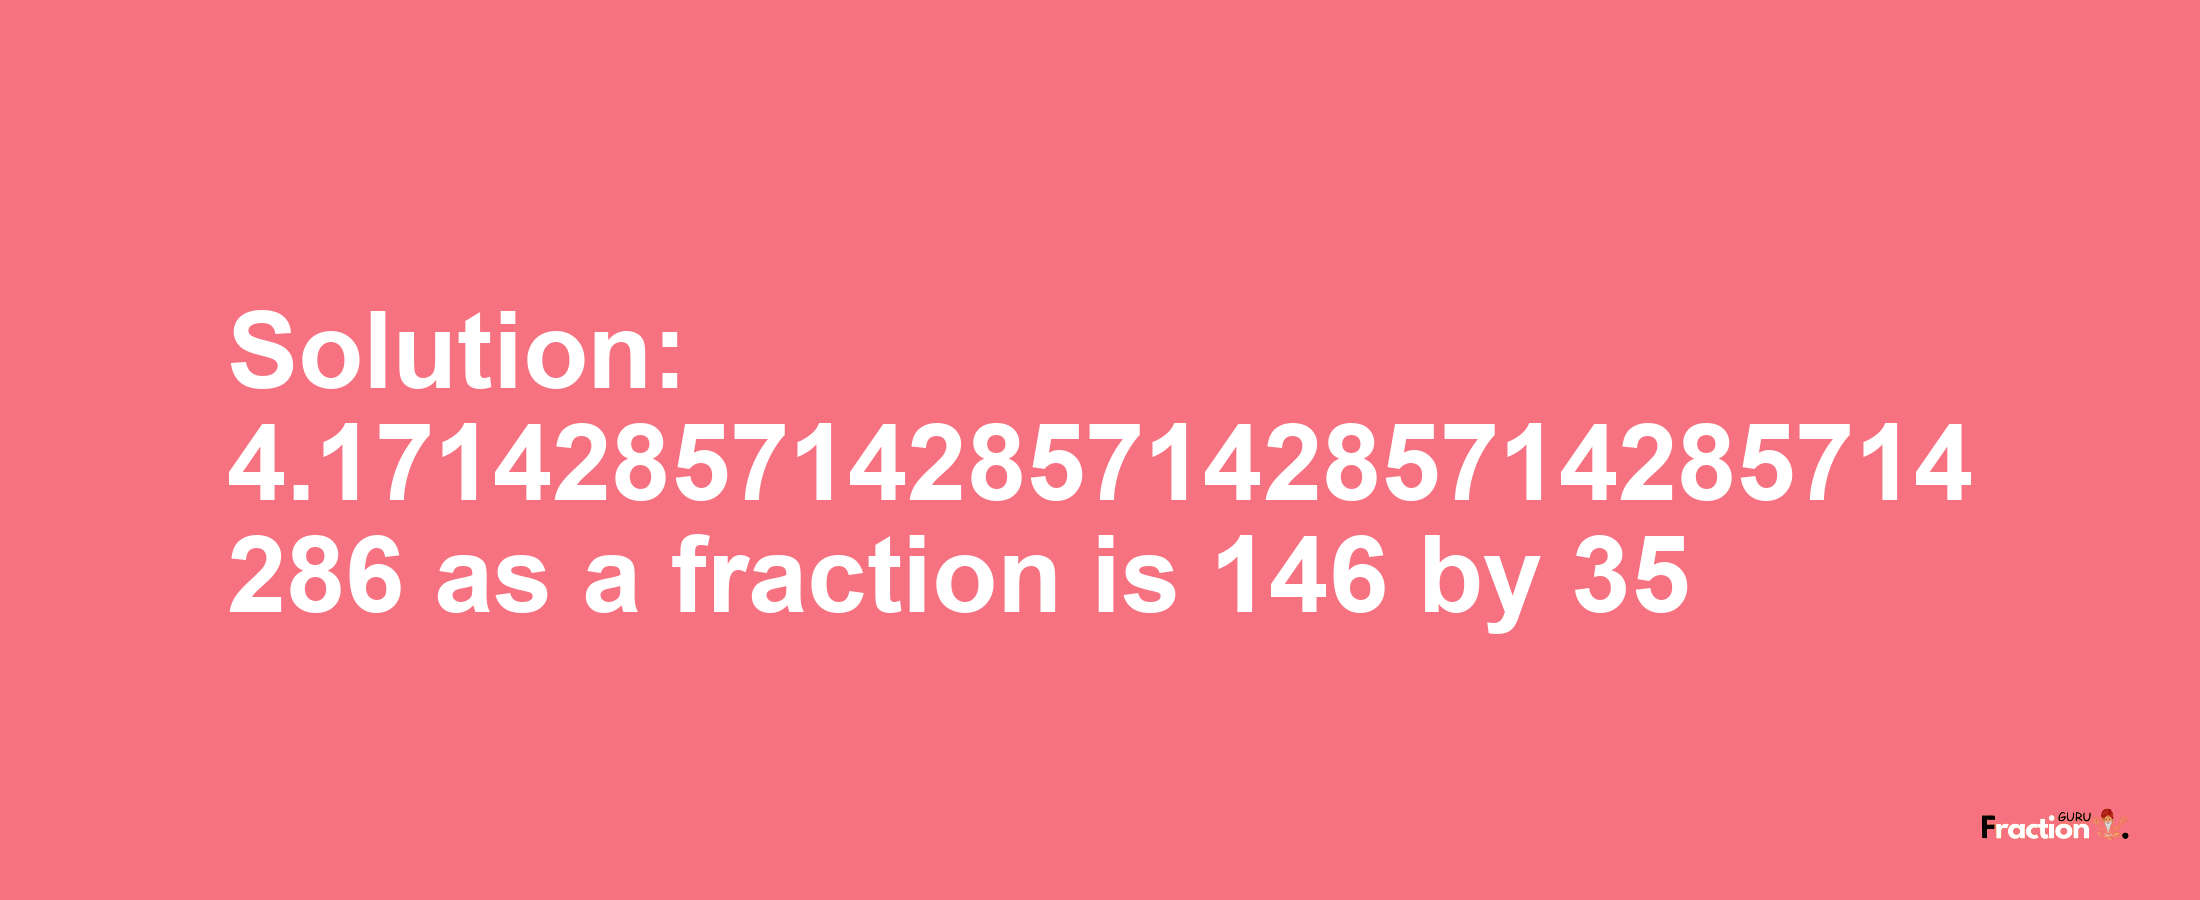 Solution:4.1714285714285714285714285714286 as a fraction is 146/35